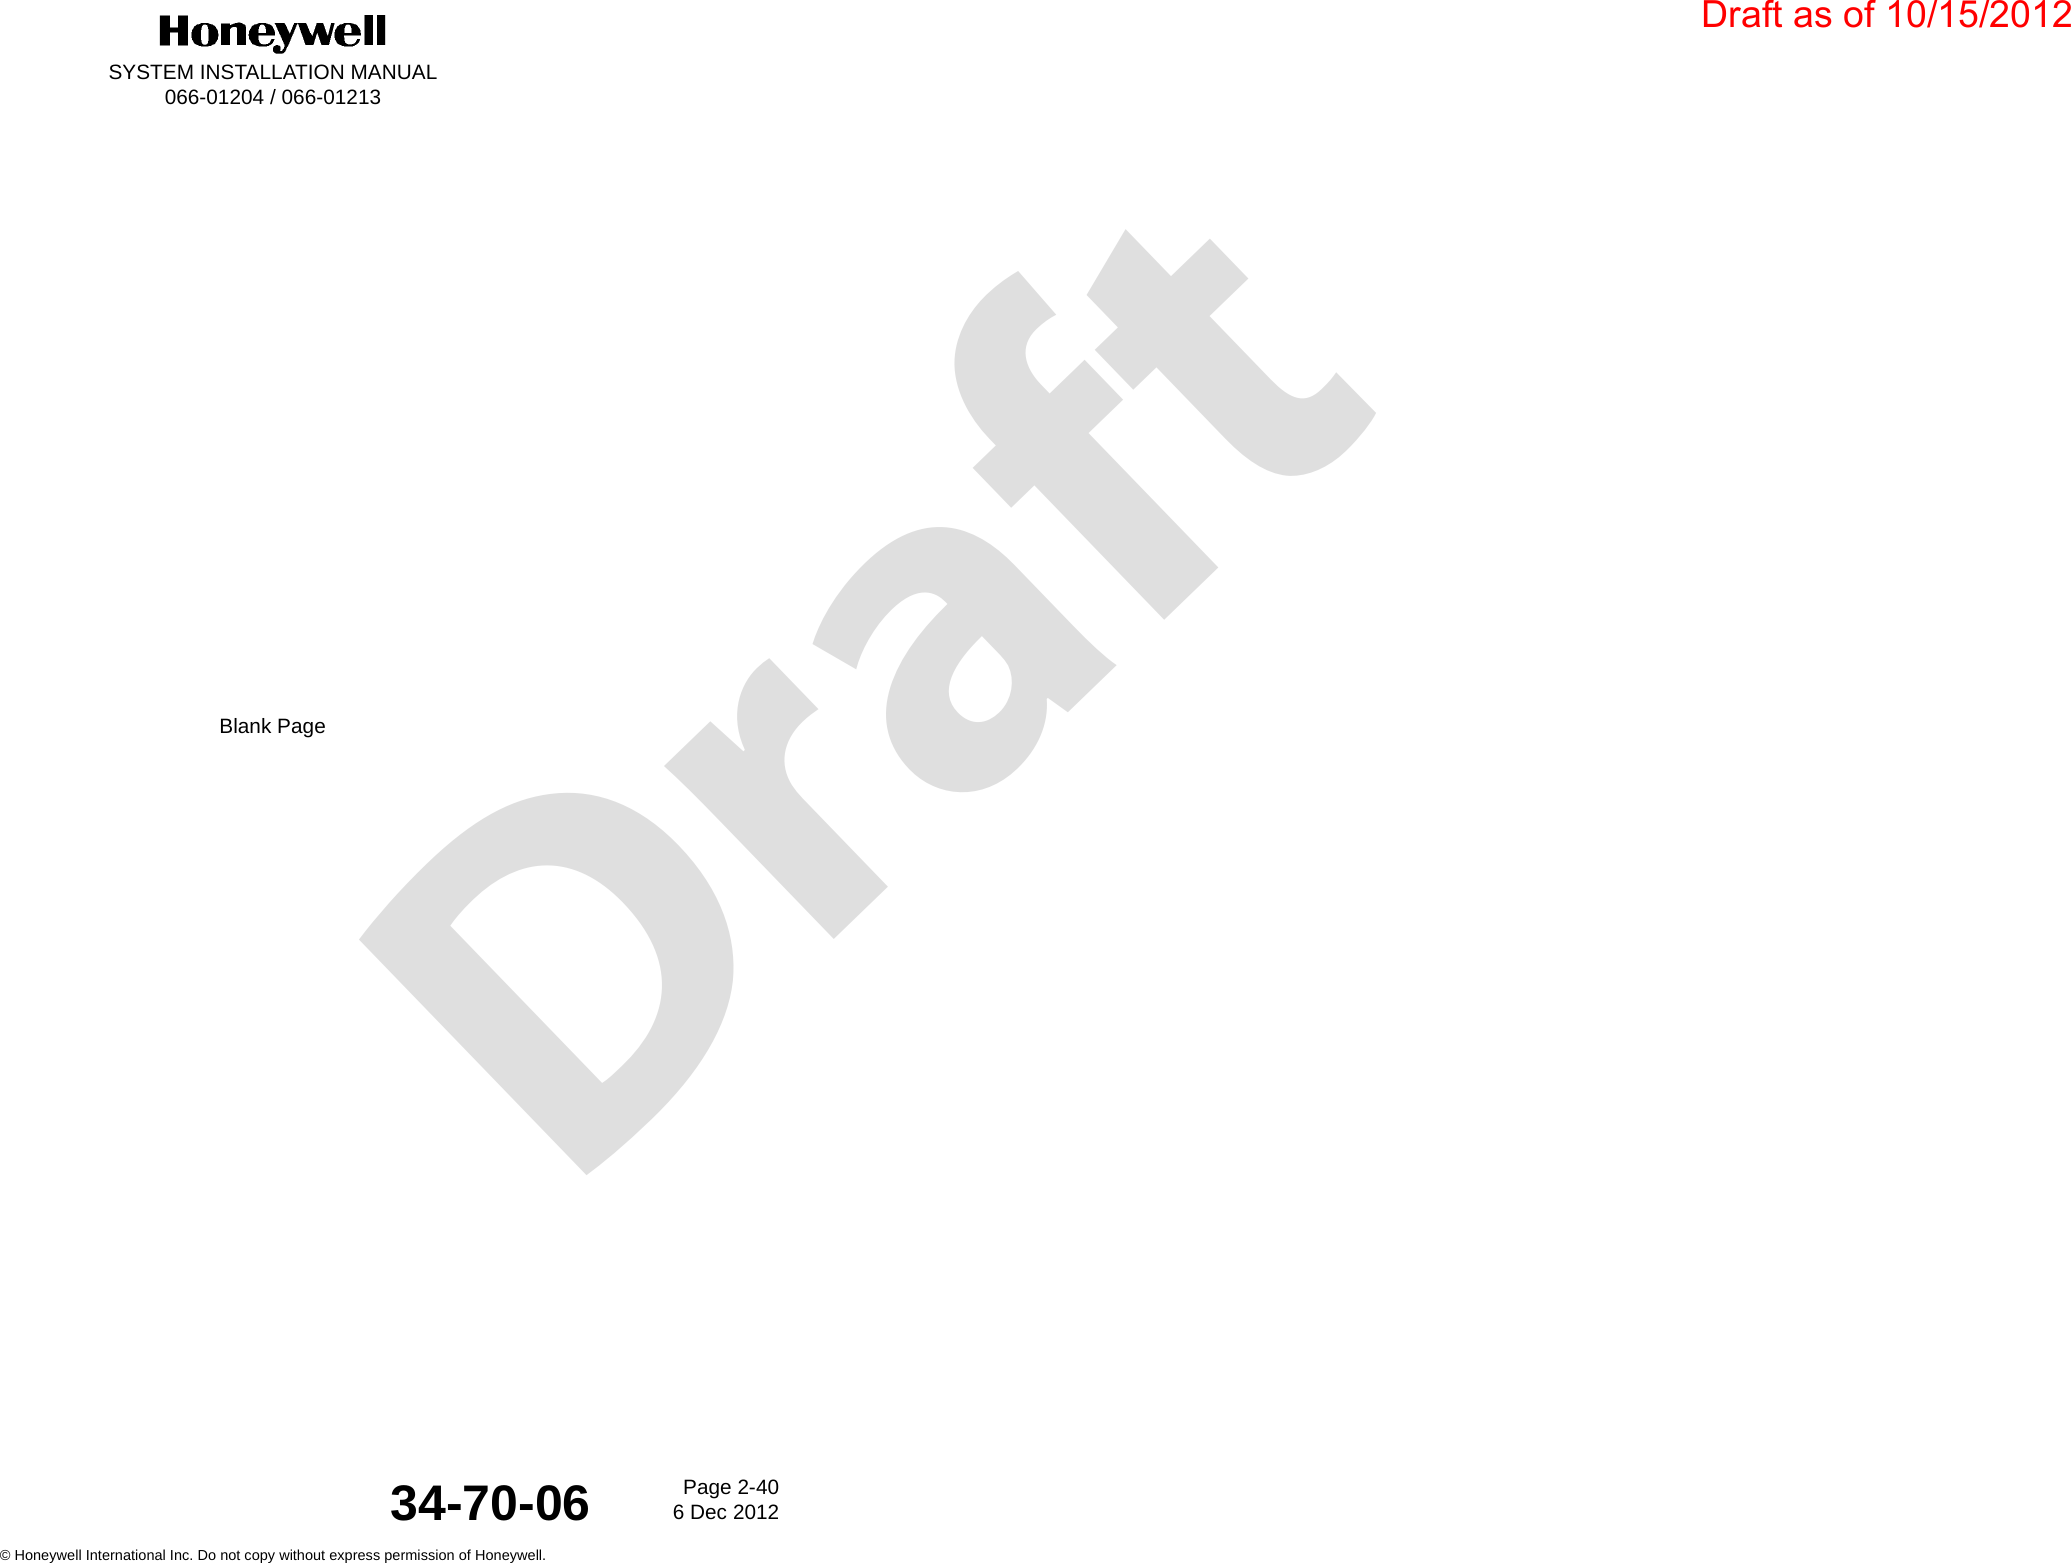 DraftSYSTEM INSTALLATION MANUAL066-01204 / 066-01213Page 2-406 Dec 2012© Honeywell International Inc. Do not copy without express permission of Honeywell.34-70-06Blank PageDraft as of 10/15/2012